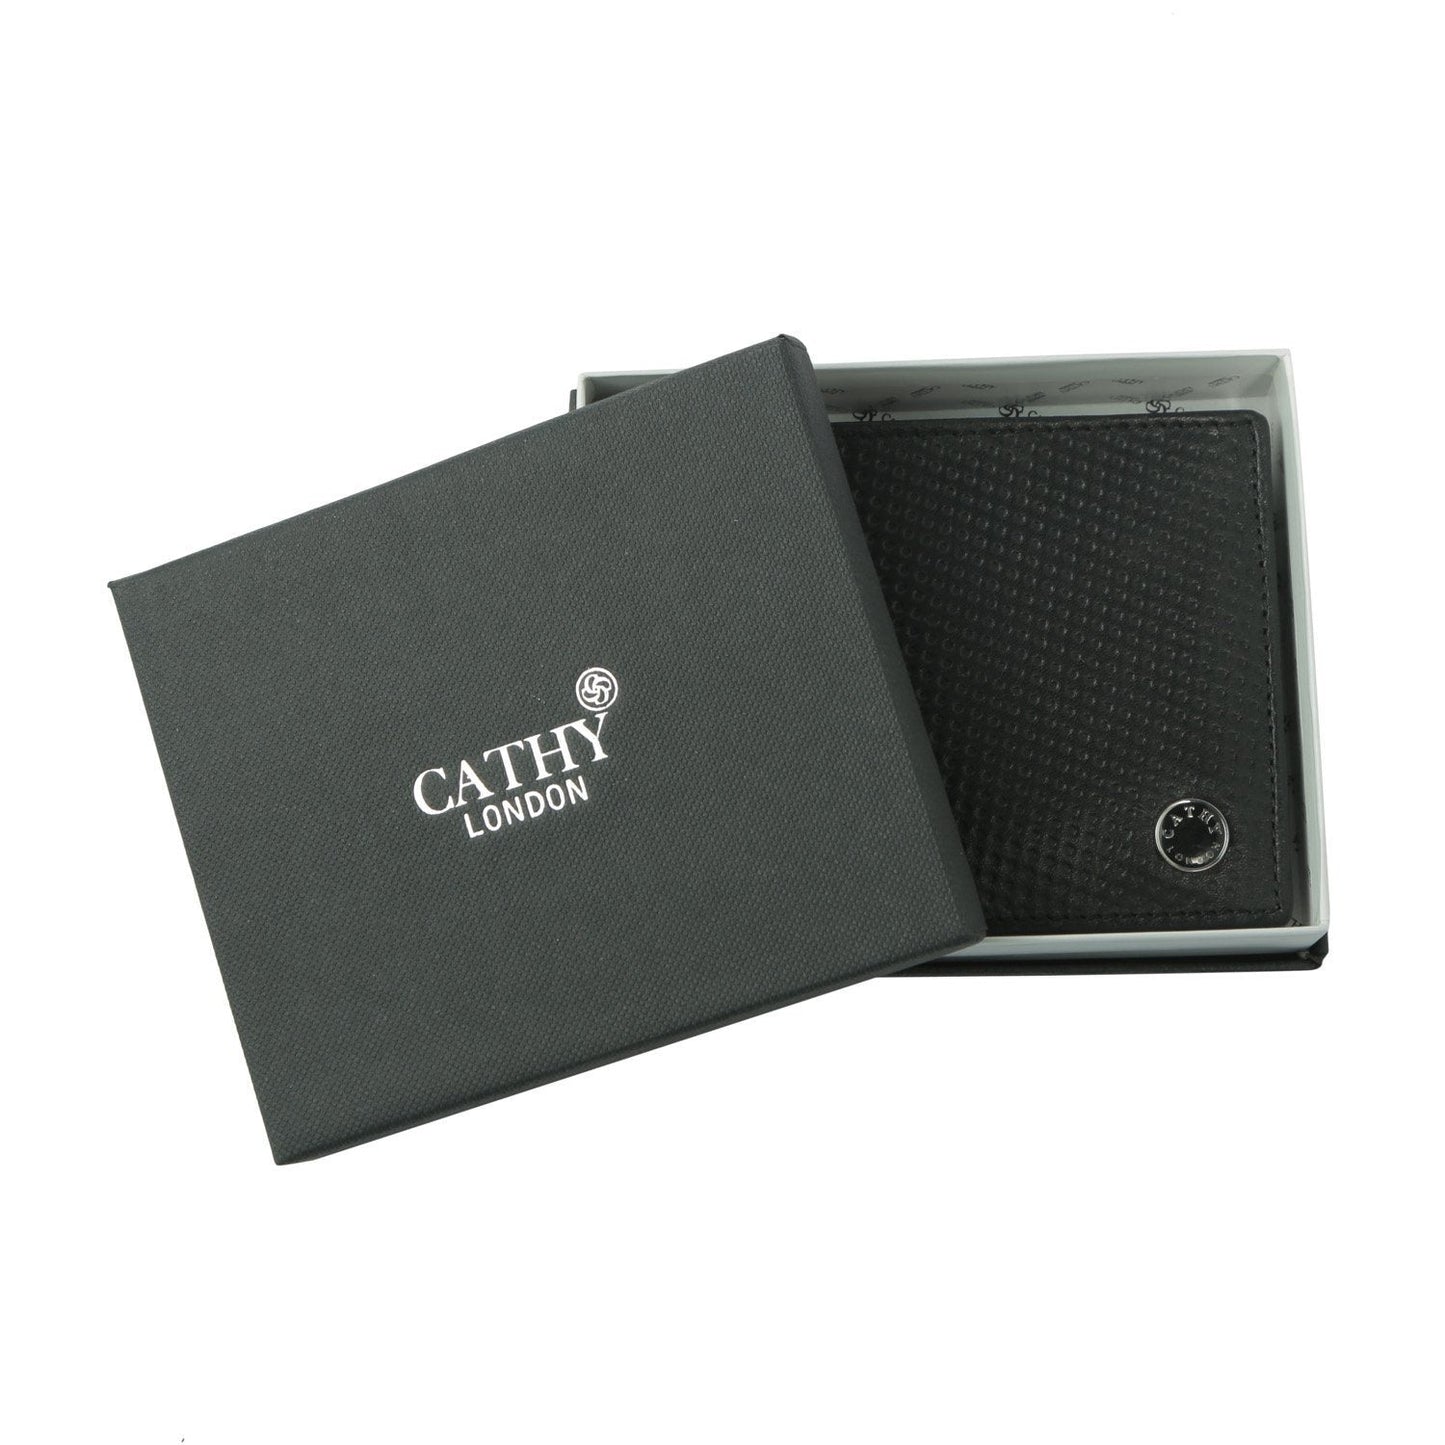 Cathy London RFID Men's Wallet 6 cc with coin pocket